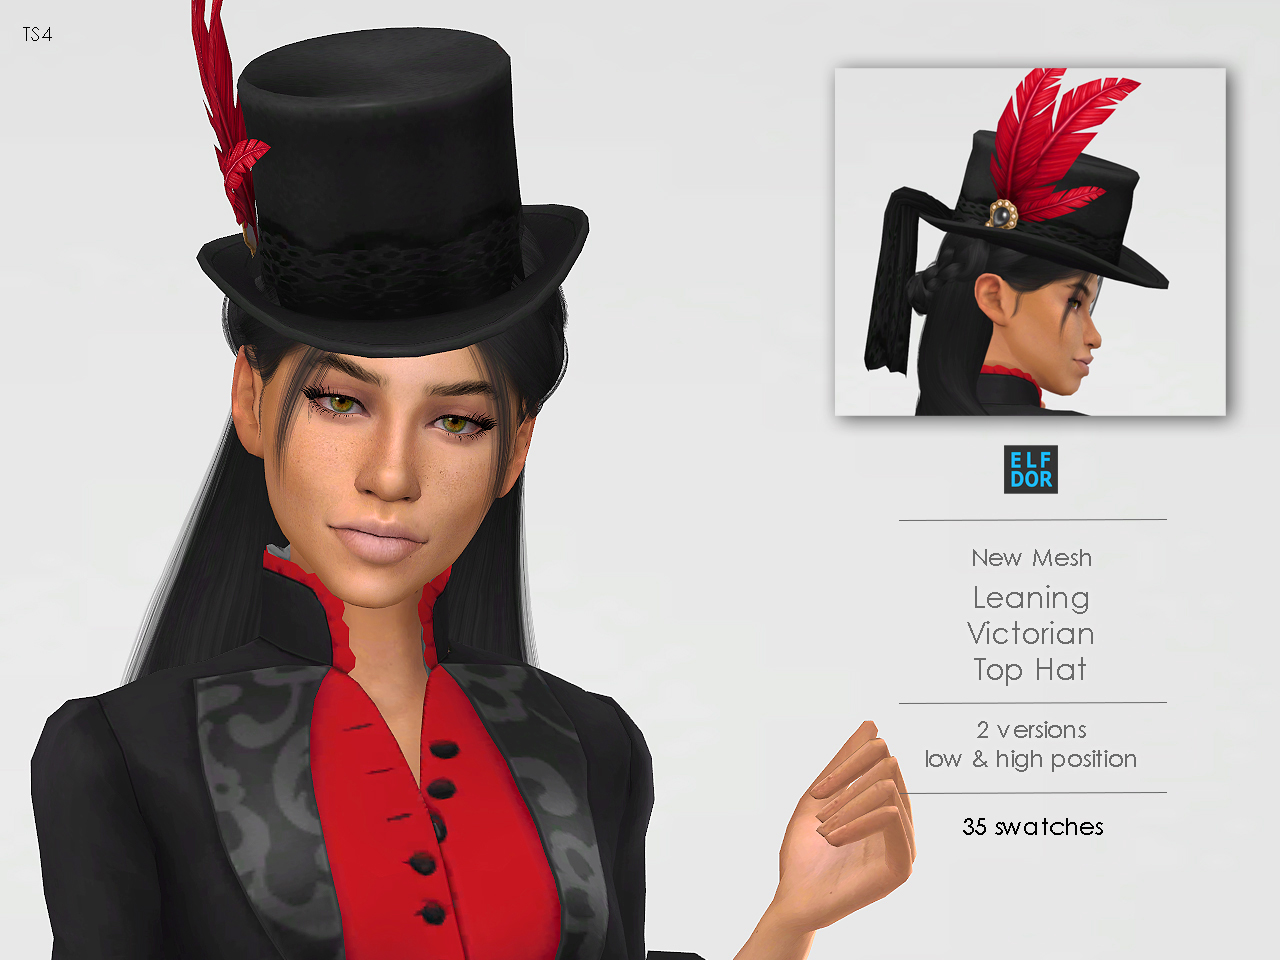 Roblox interminable Rooms Top hat. Roblox interminable Rooms entity Top hat. Patreon content